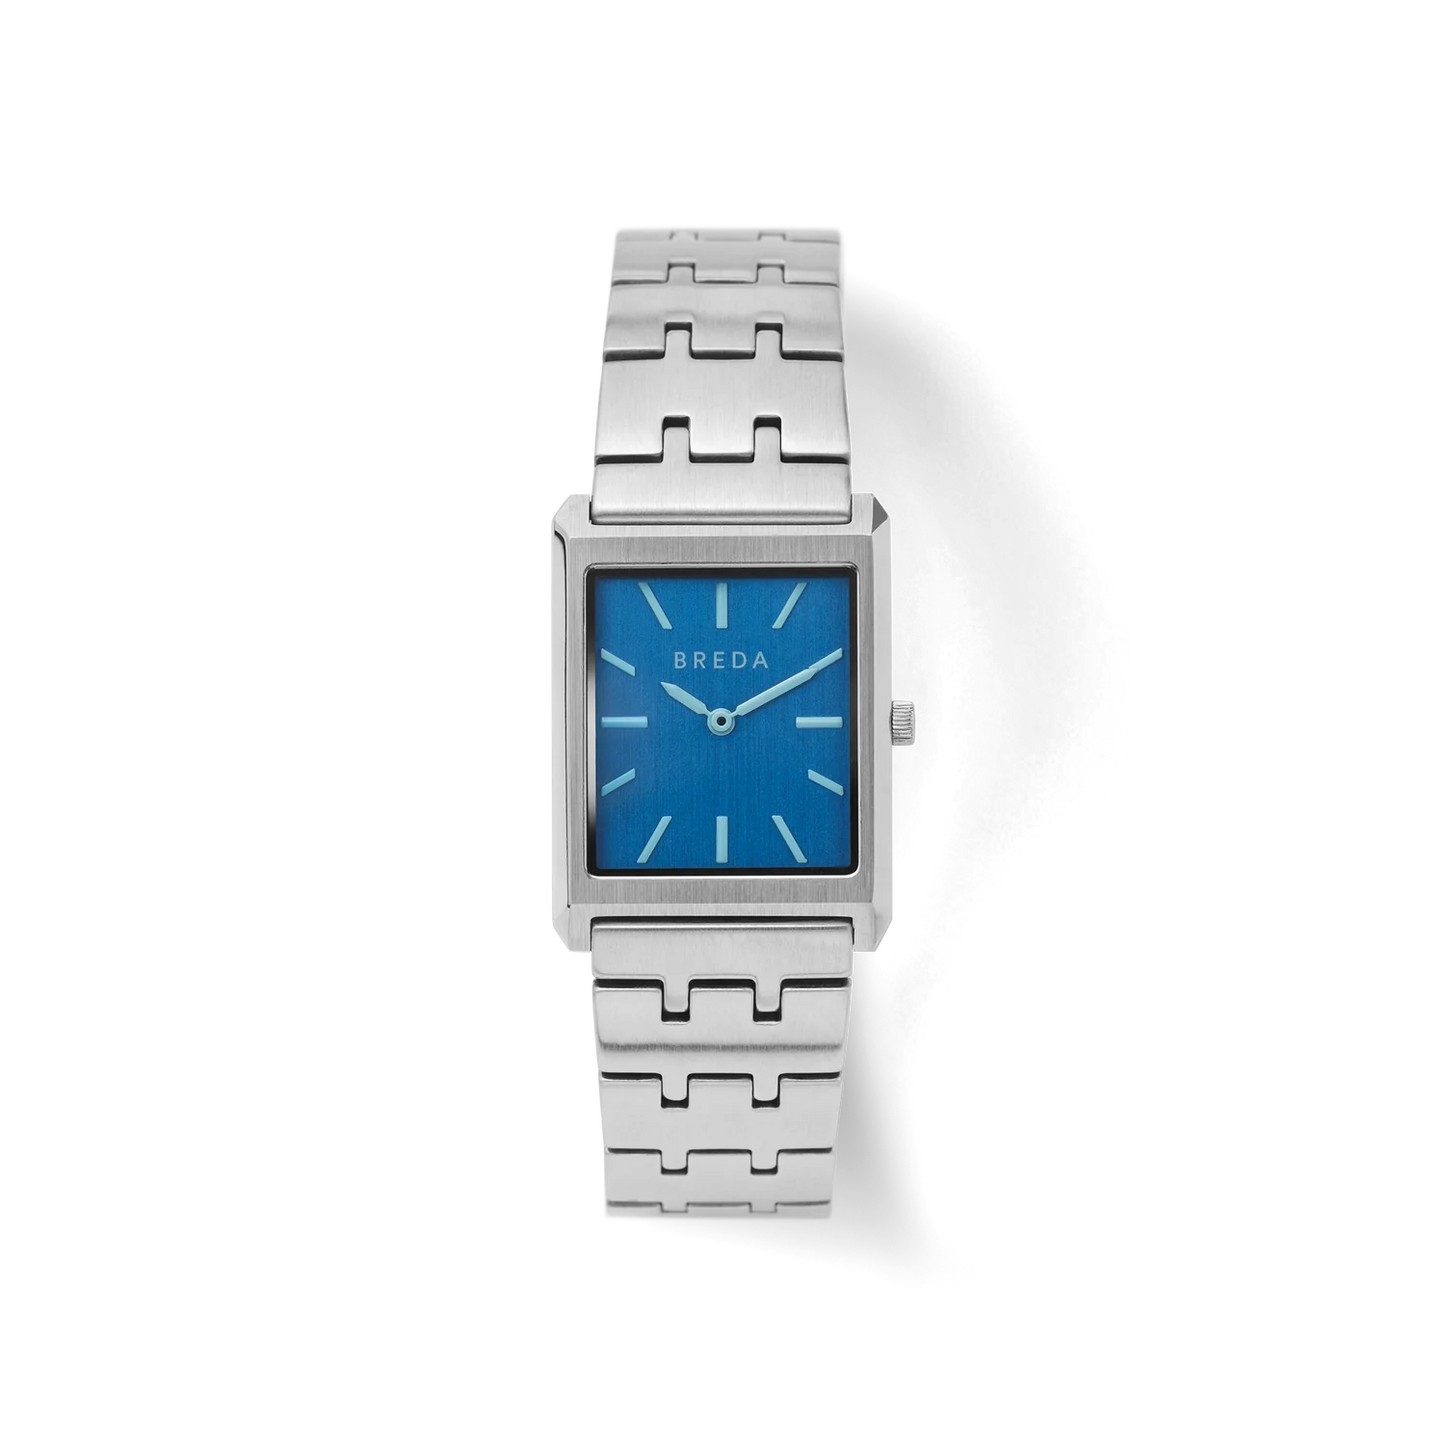 Virgil Watch - Blue Face Watches Breda Stainless Steel and Metal  